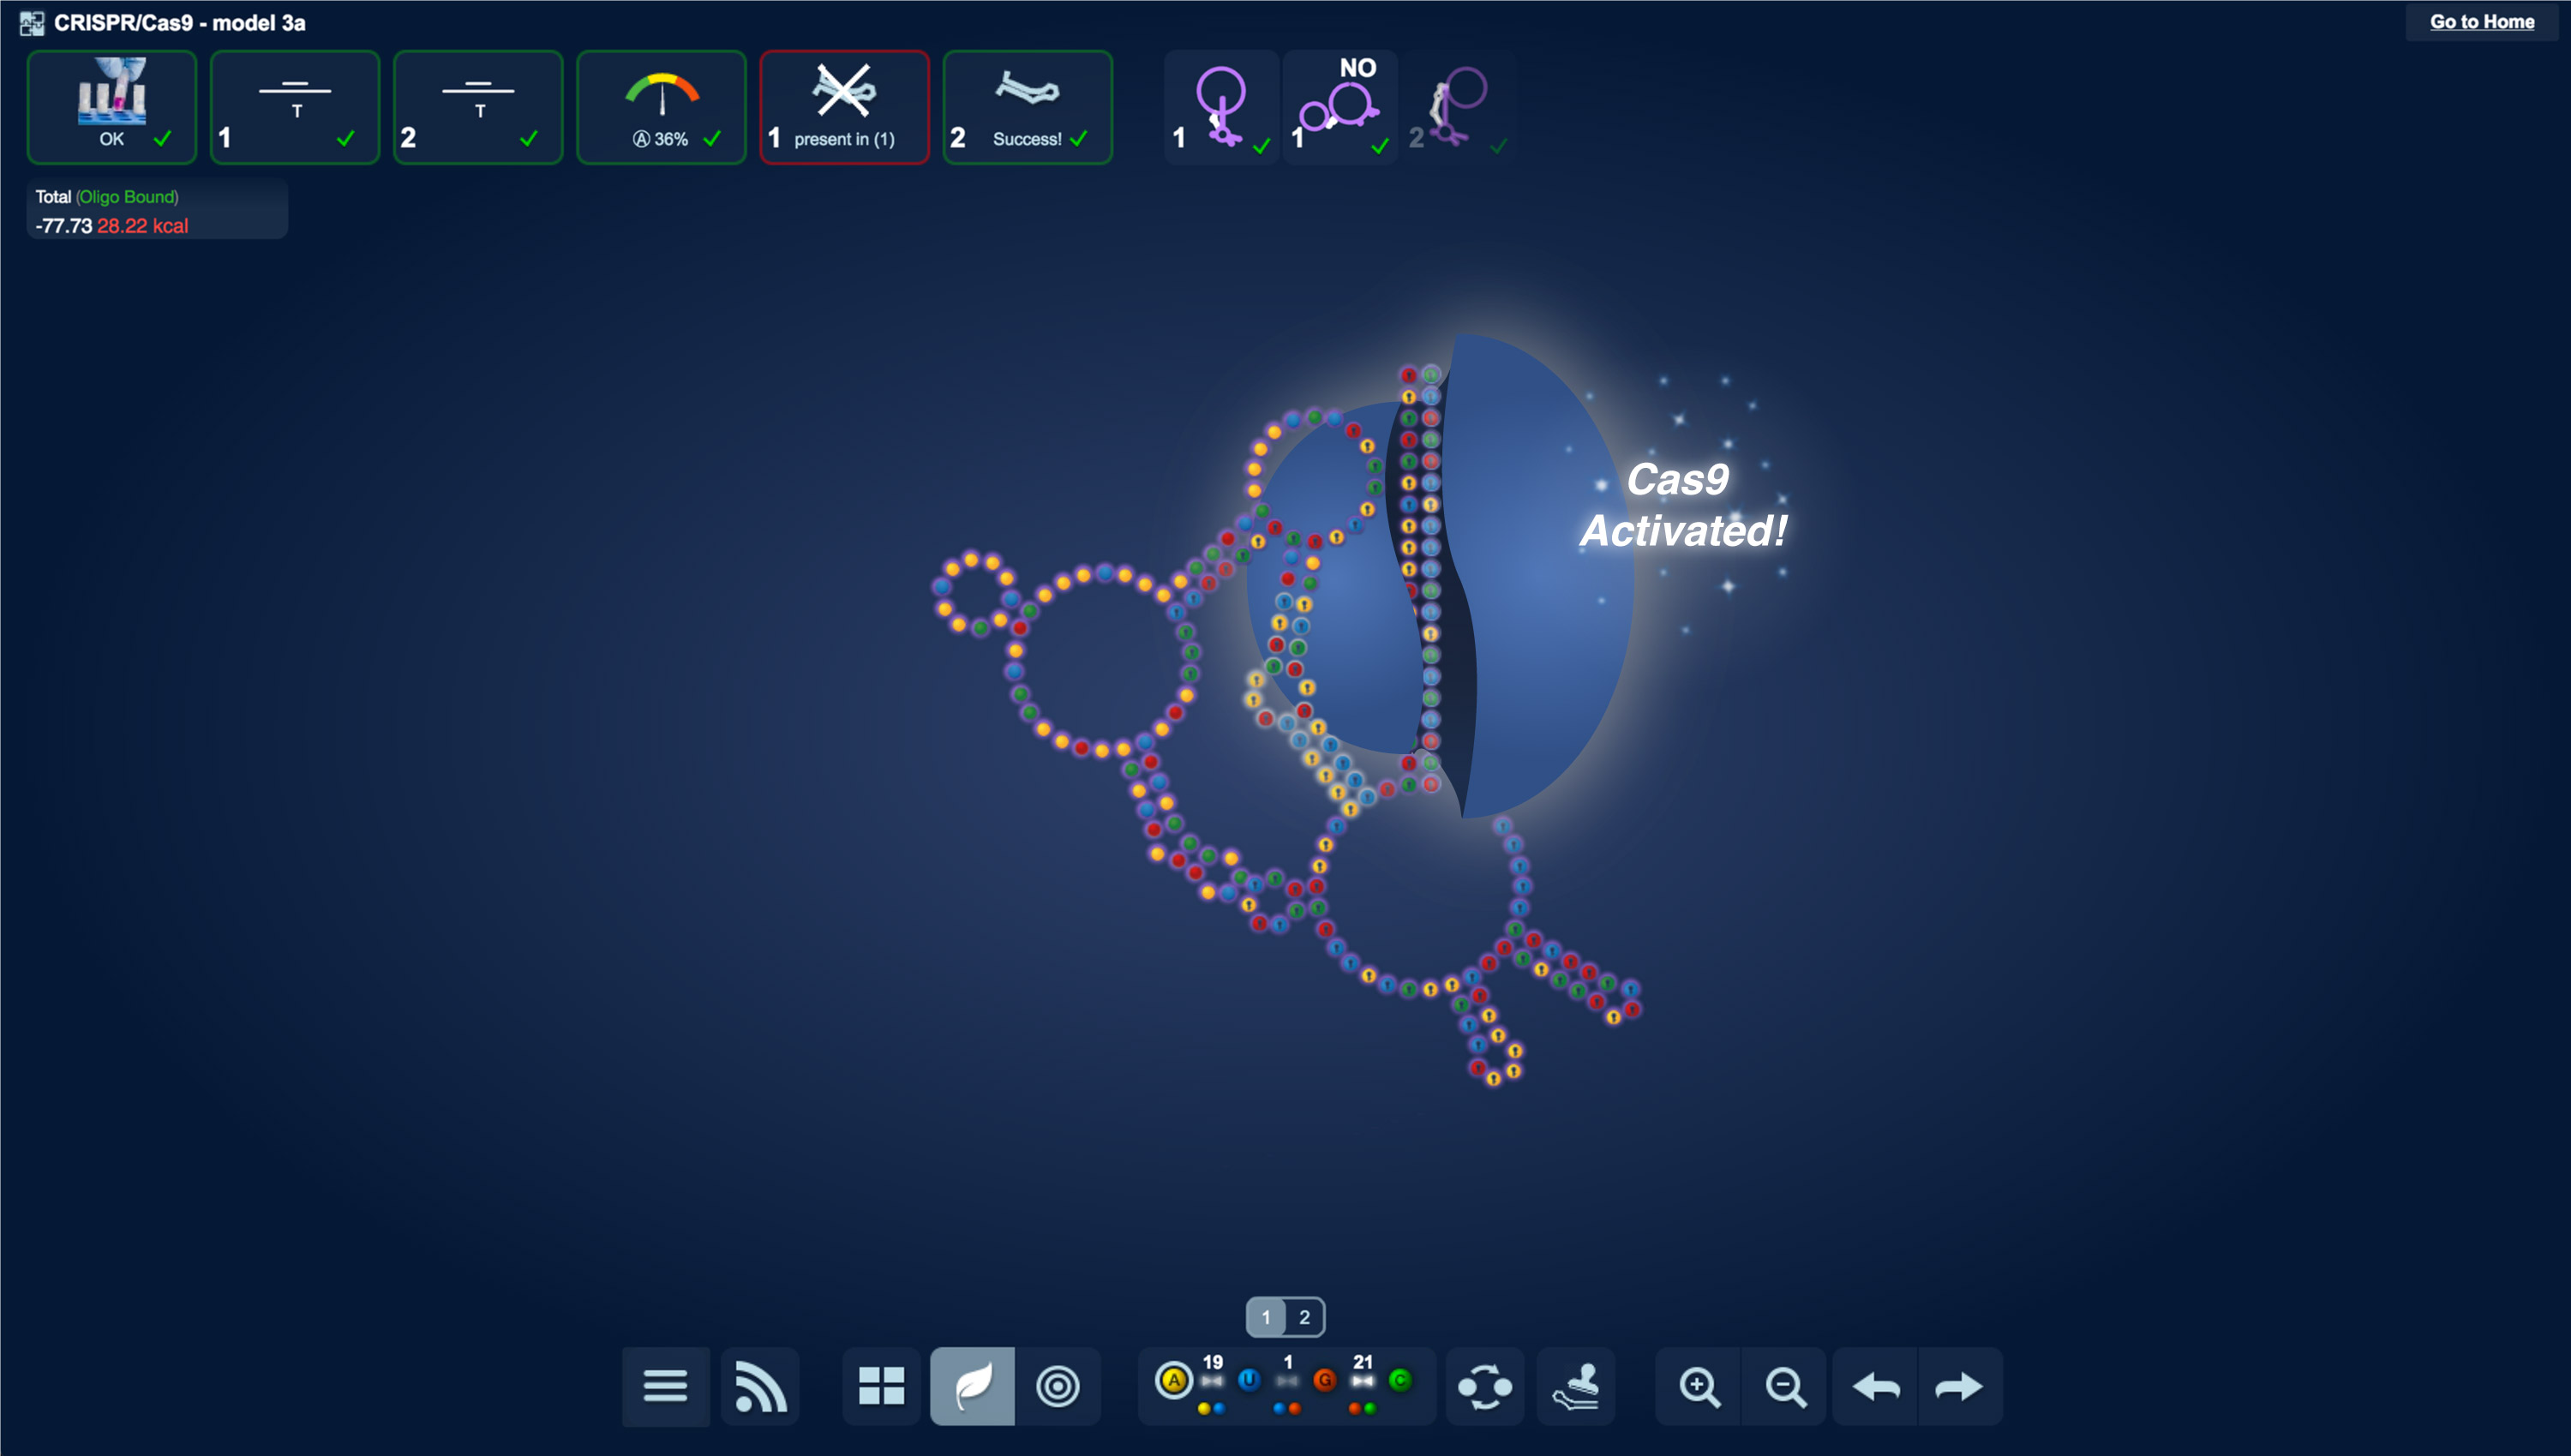 Screenshot from Eterna OpenCRISPR puzzle showing successful RNA design and Cas9 activation